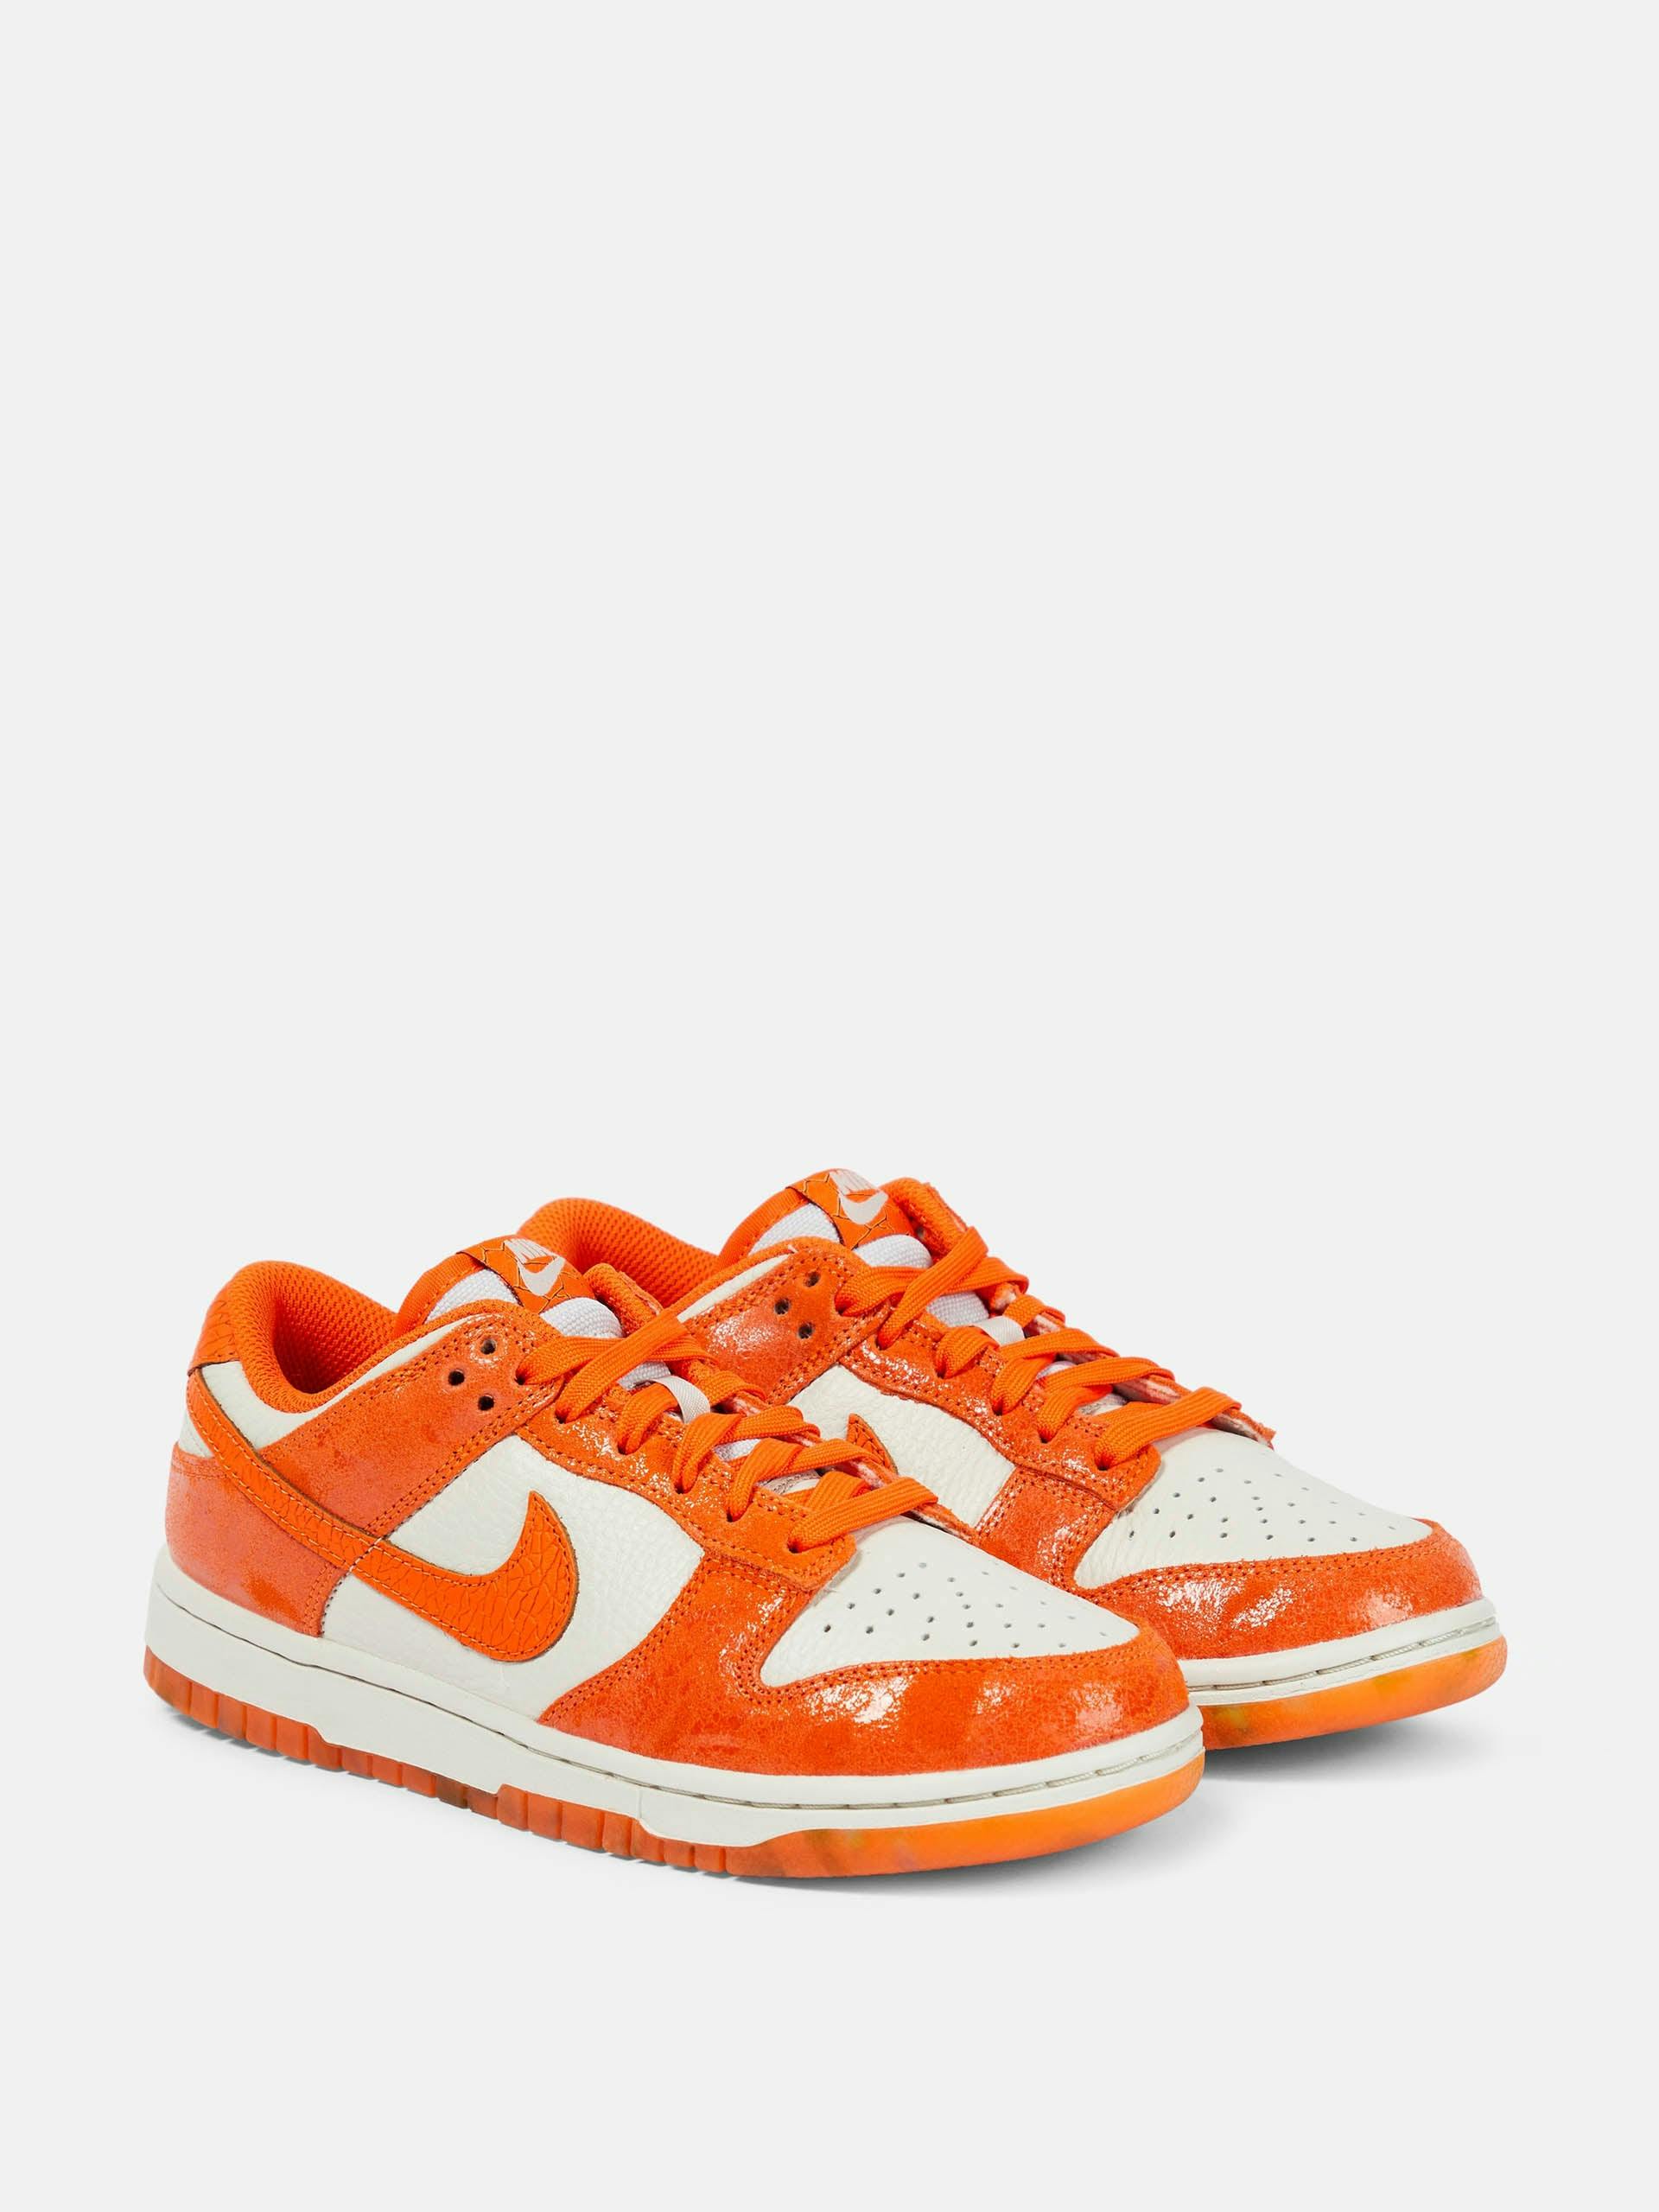 Dunk Low suede-trimmed sneakers in orange and white